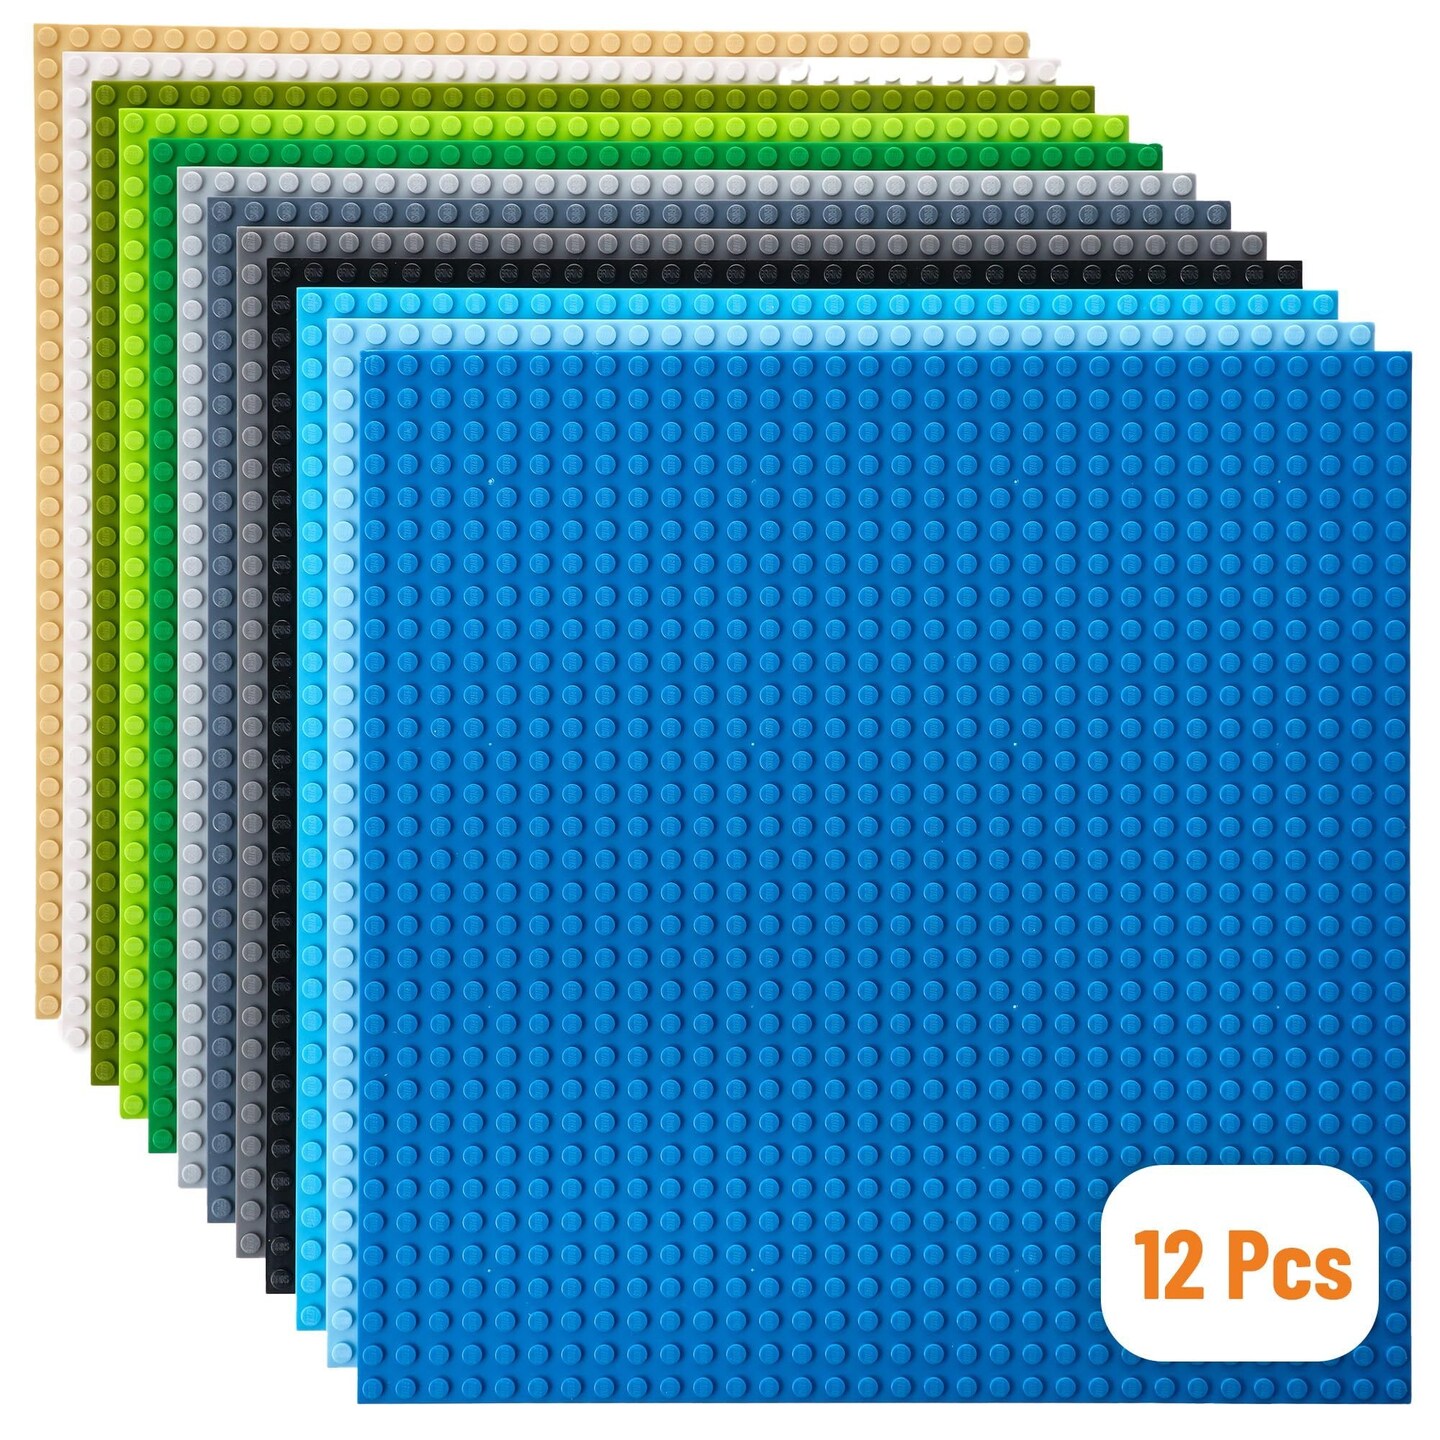 Strictly Briks Classic Stackable Baseplates, For Building Bricks, Bases for Tables, Mats, and More, 100% Compatible with All Major Brands, Nature Colors, 12 Pack, 10x10 Inches